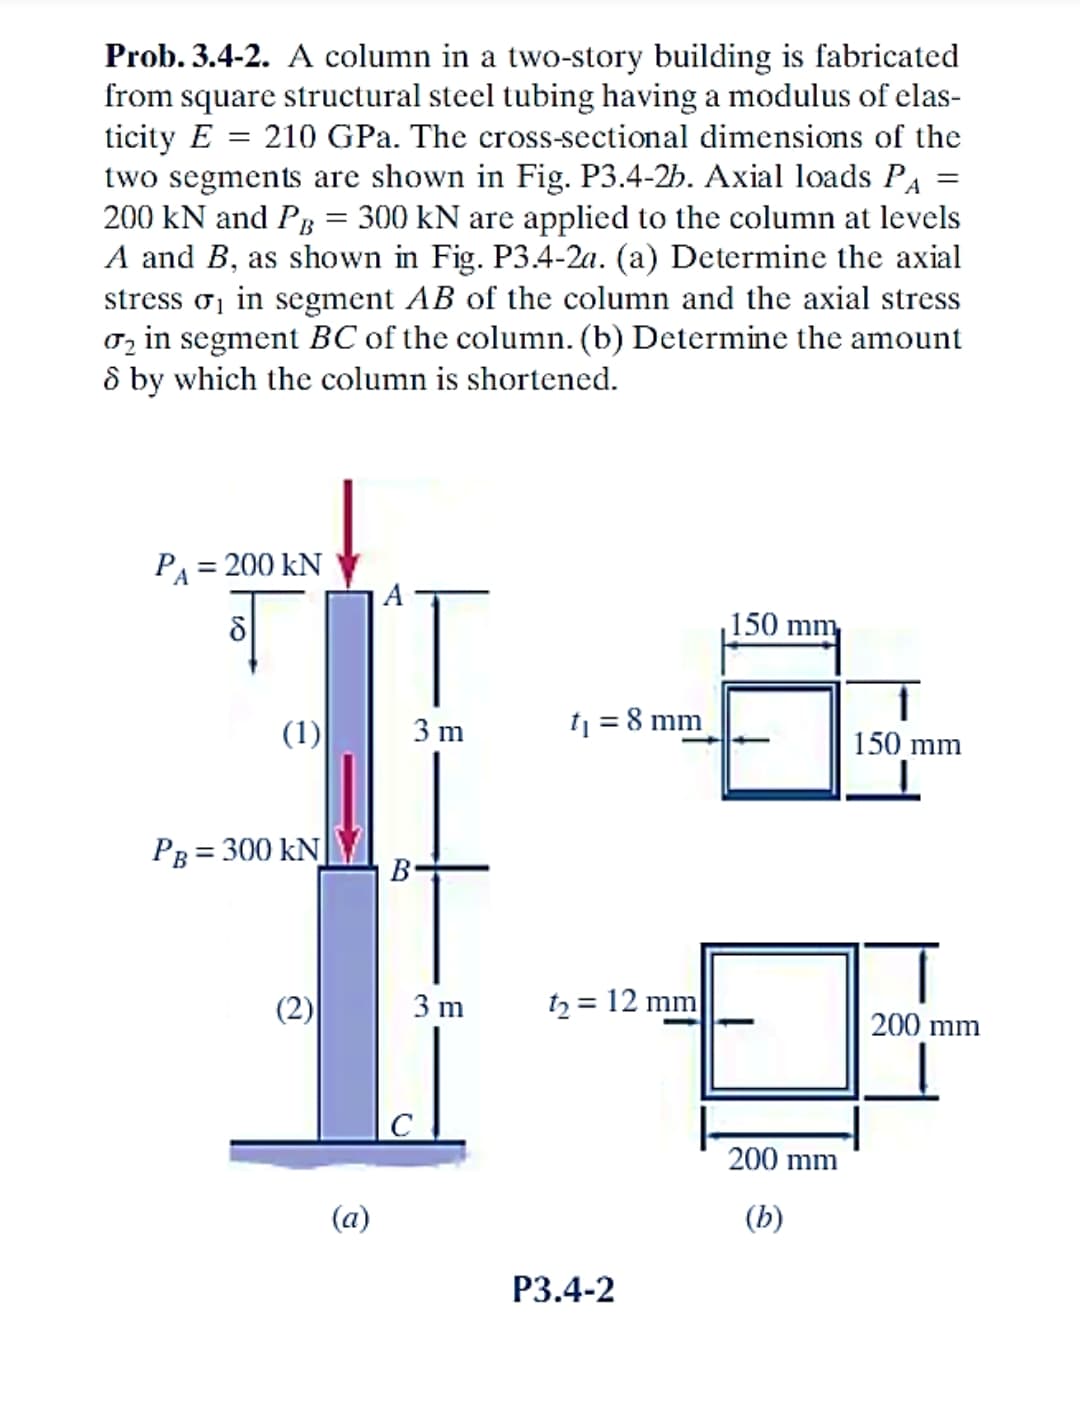 Prob. 3.4-2. A column in a two-story building is fabricated
from square structural steel tubing having a modulus of elas-
ticity E = 210 GPa. The cross-sectional dimensions of the
two segments are shown in Fig. P3.4-2b. Axial loads PA
200 kN and PB = 300 kN are applied to the column at levels
A and B, as shown in Fig. P3.4-2a. (a) Determine the axial
stress σ₁ in segment AB of the column and the axial stress
₂ in segment BC of the column. (b) Determine the amount
8 by which the column is shortened.
PA = 200 KN
5
PB =
(1)
= 300 KN
(a)
3 m
B
3 m
t₁ = 8 mm
t₂ = 12 mm
P3.4-2
150 mm,
200 mm
(b)
=
1
150 mm
200 mm